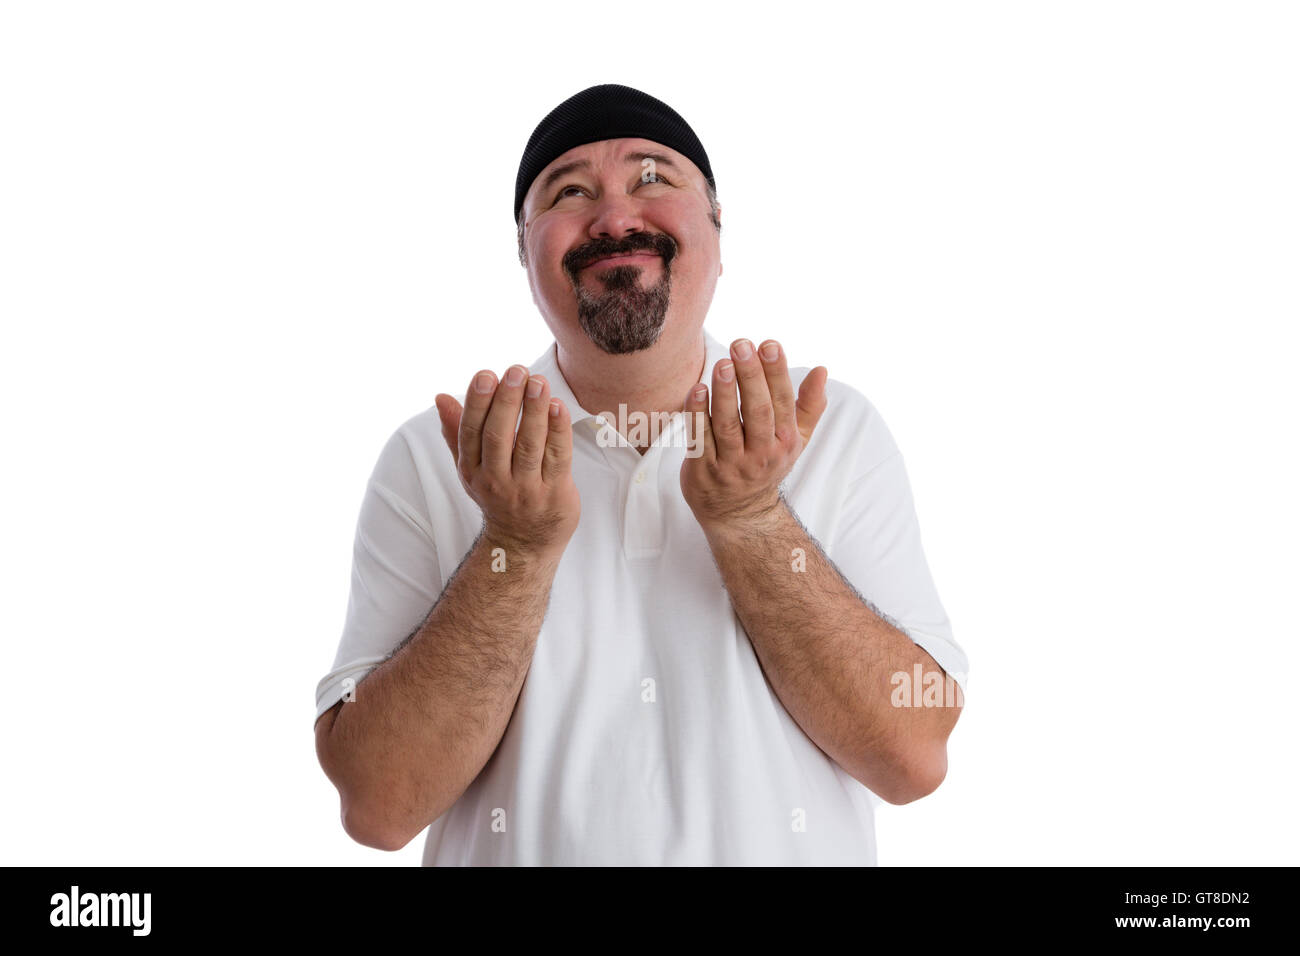 Middle-aged casual man with a goatee imploring God to find a solution raising his hands in supplication and looking up to heaven Stock Photo